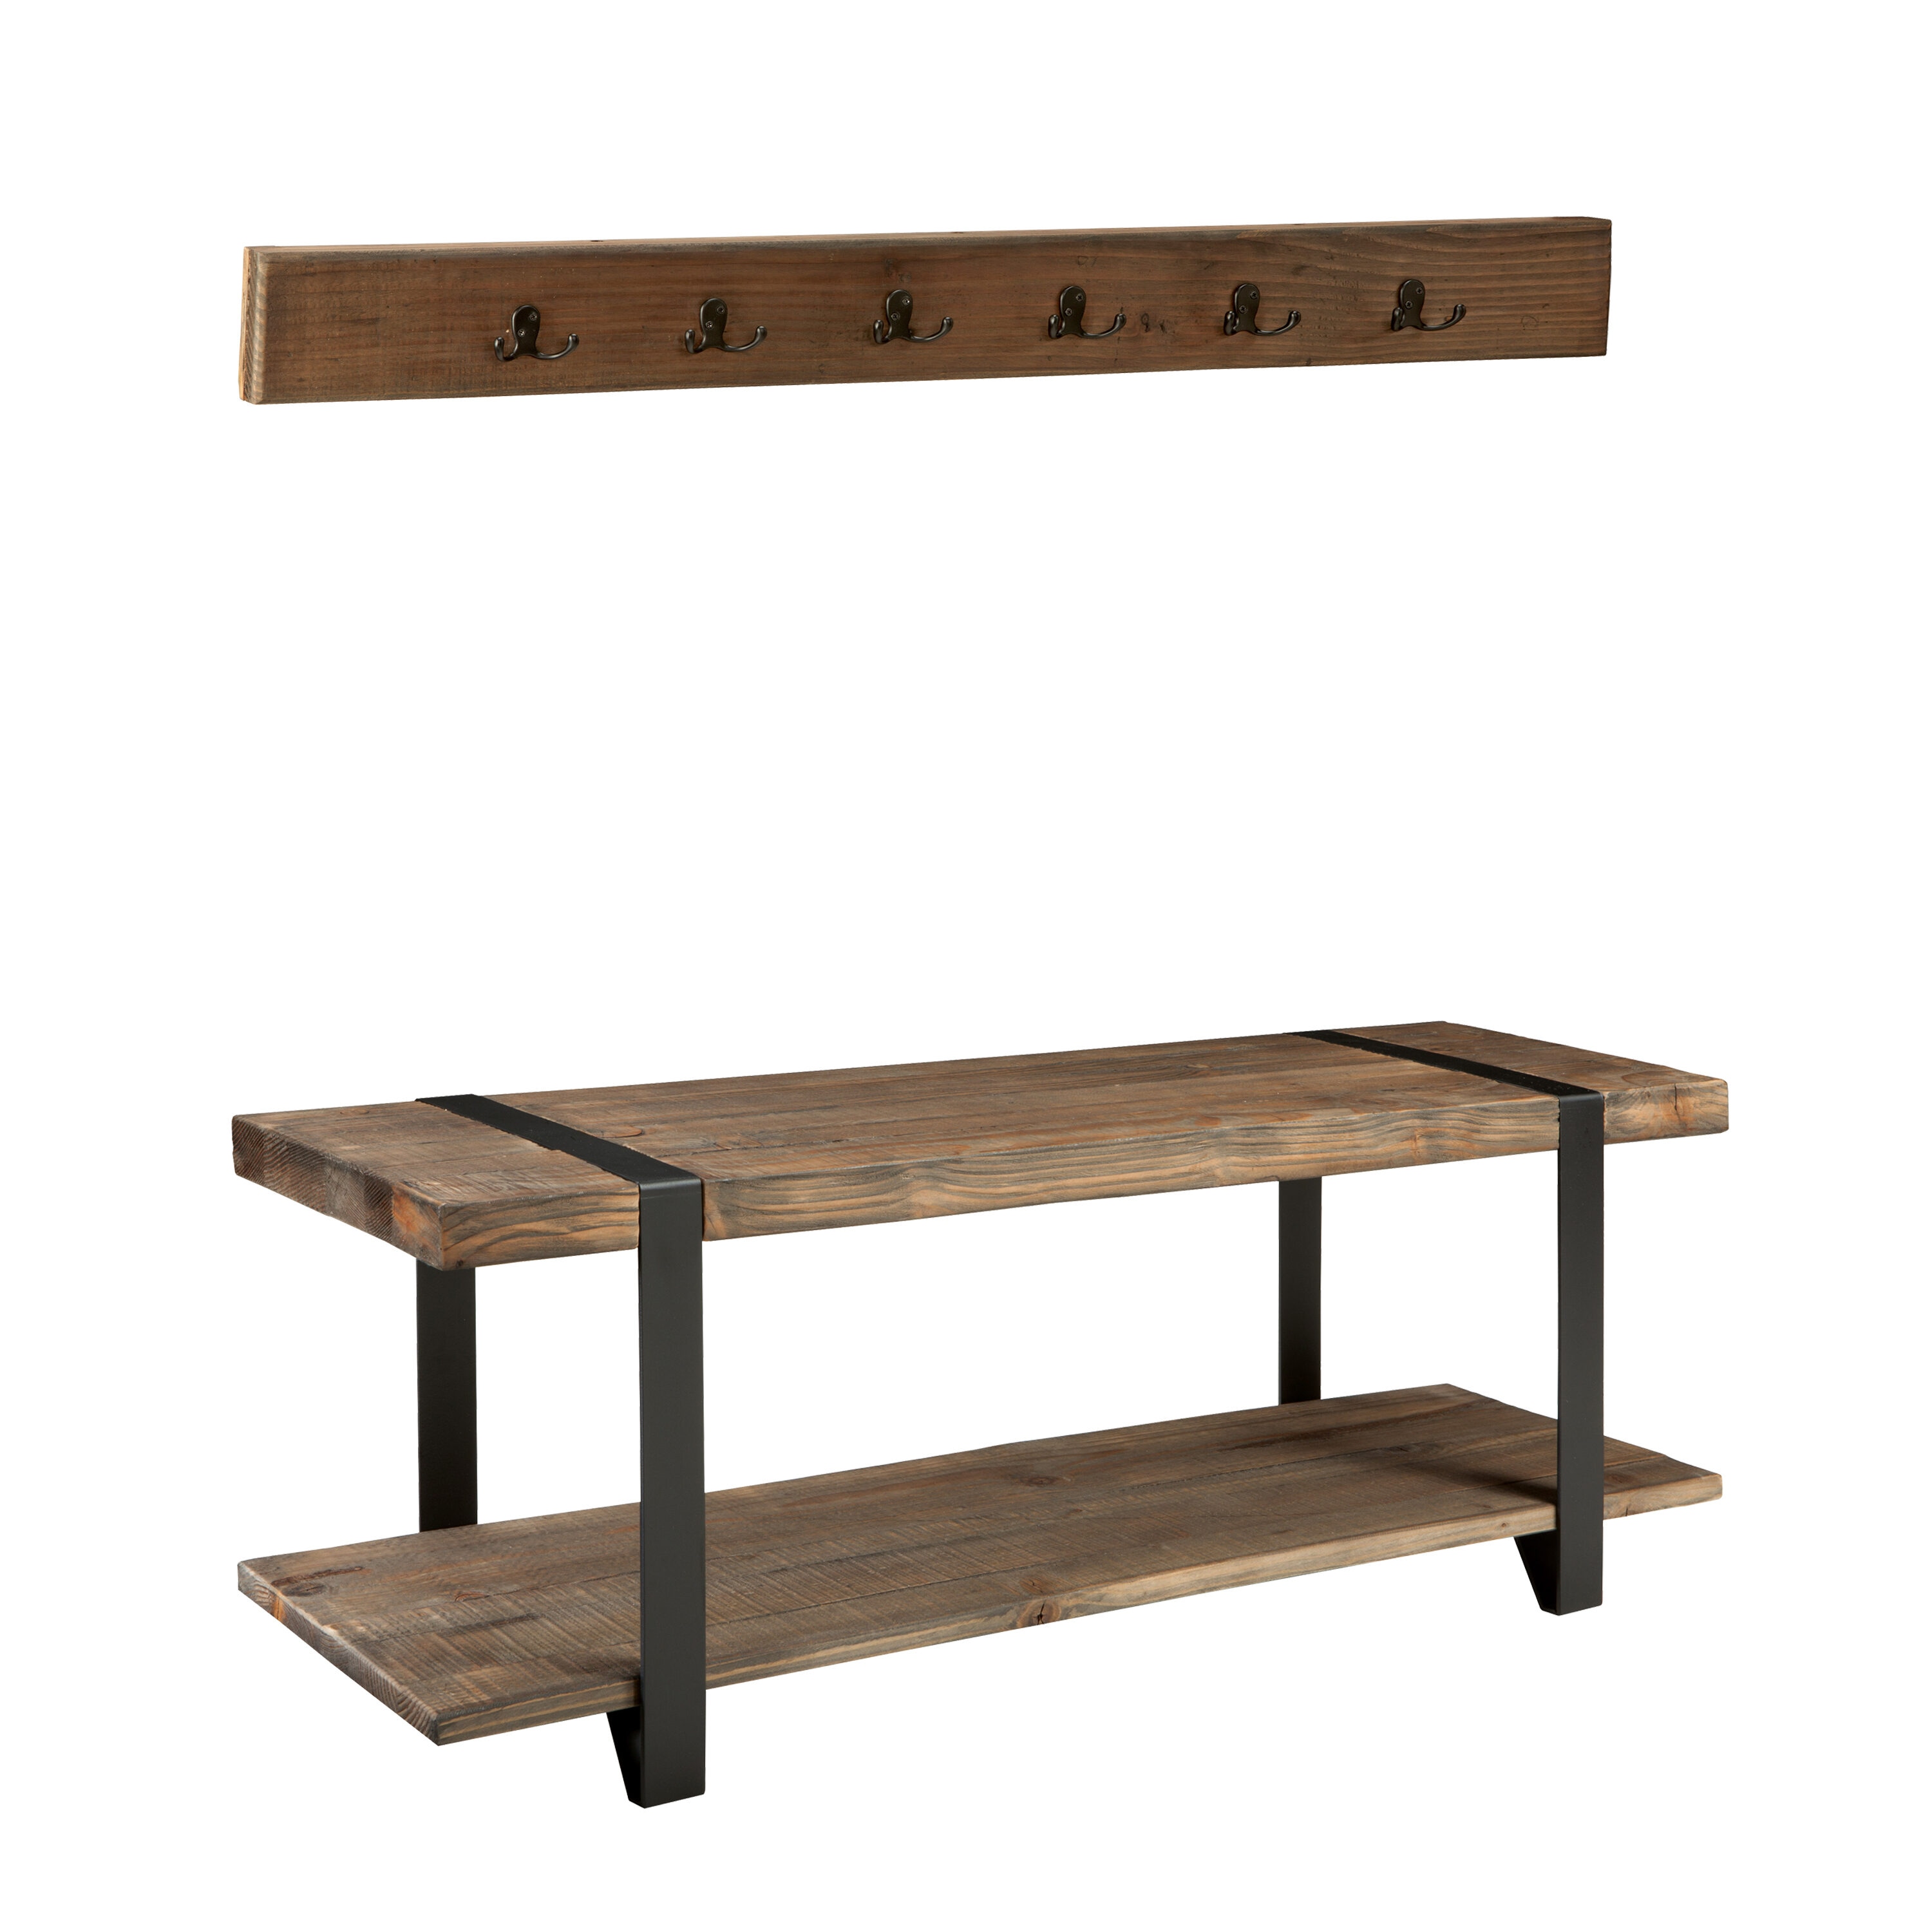 Alaterre Furniture Alpine Natural Live Edge 36 in. Bench with Coat